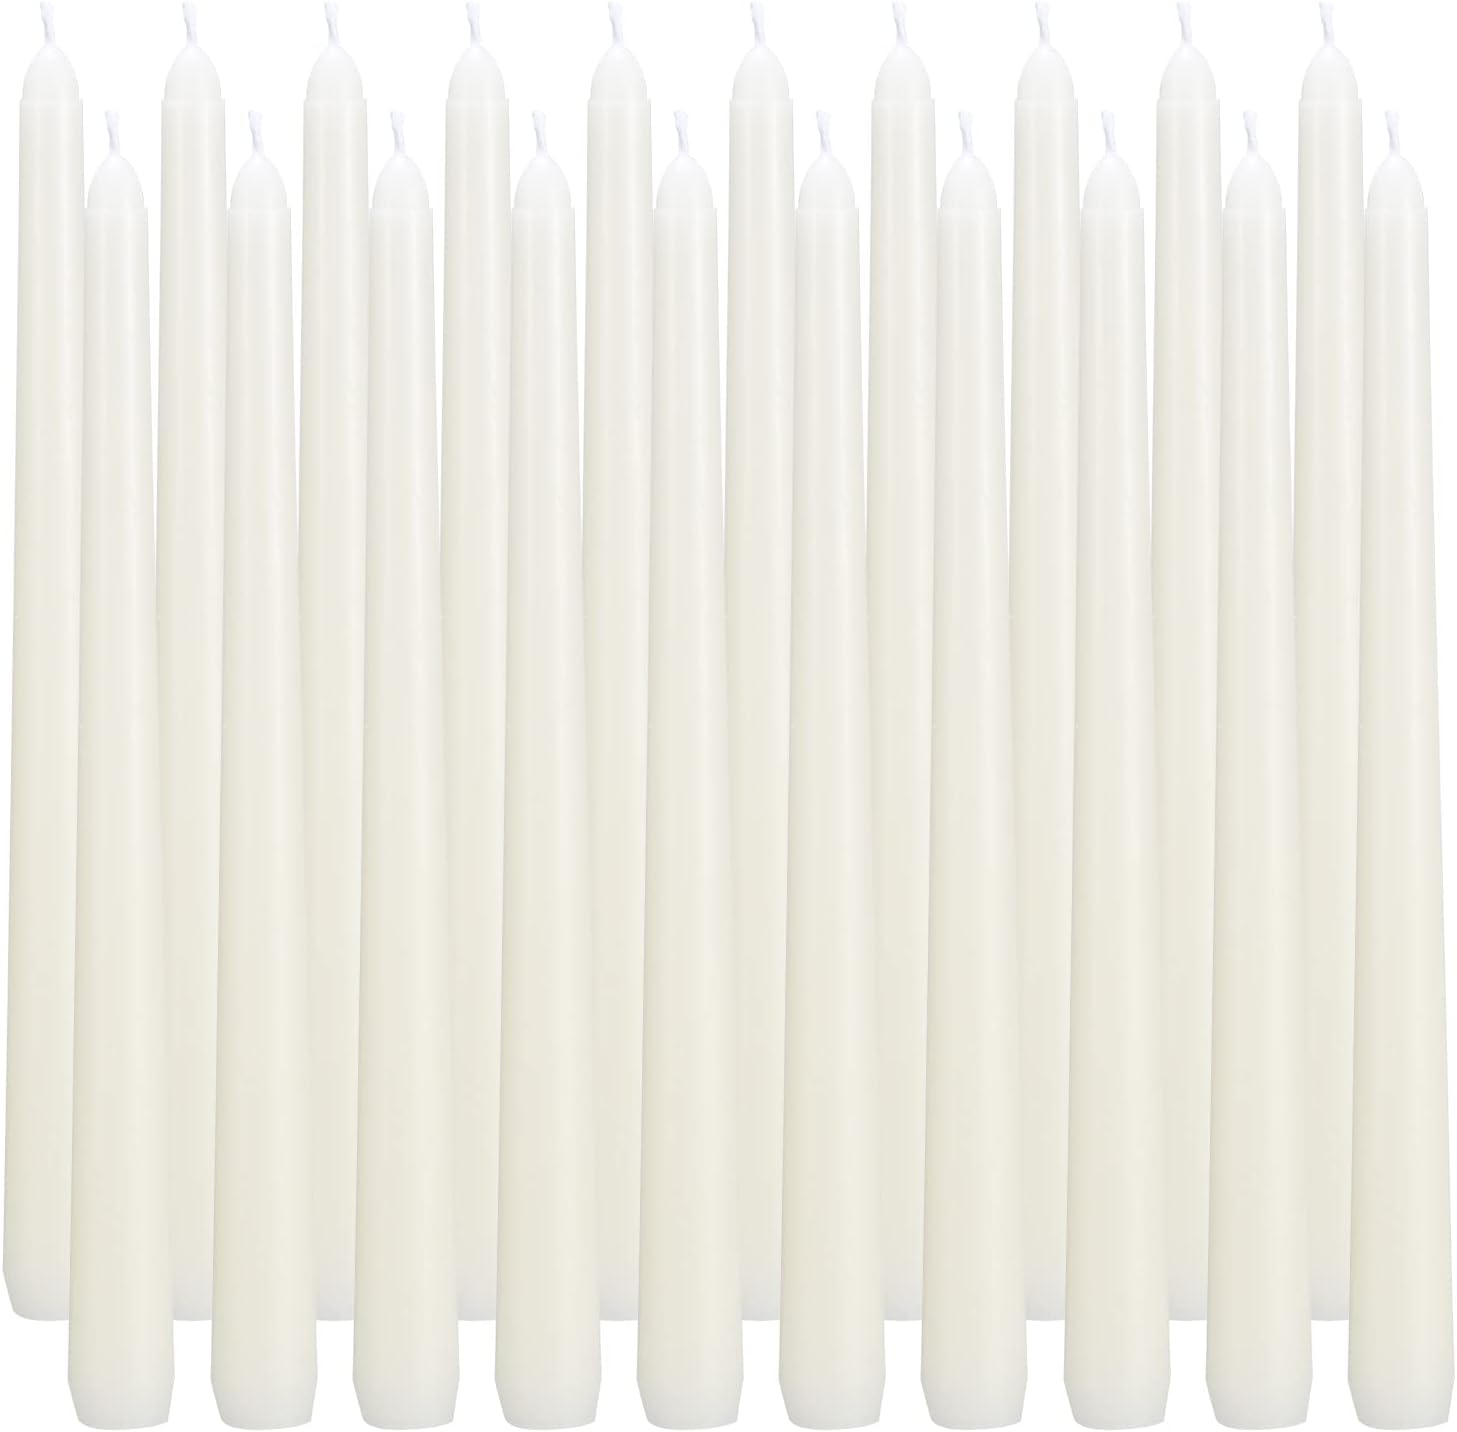 flamecan Ivory Taper Candles, Set of 20 Unscented and [...]